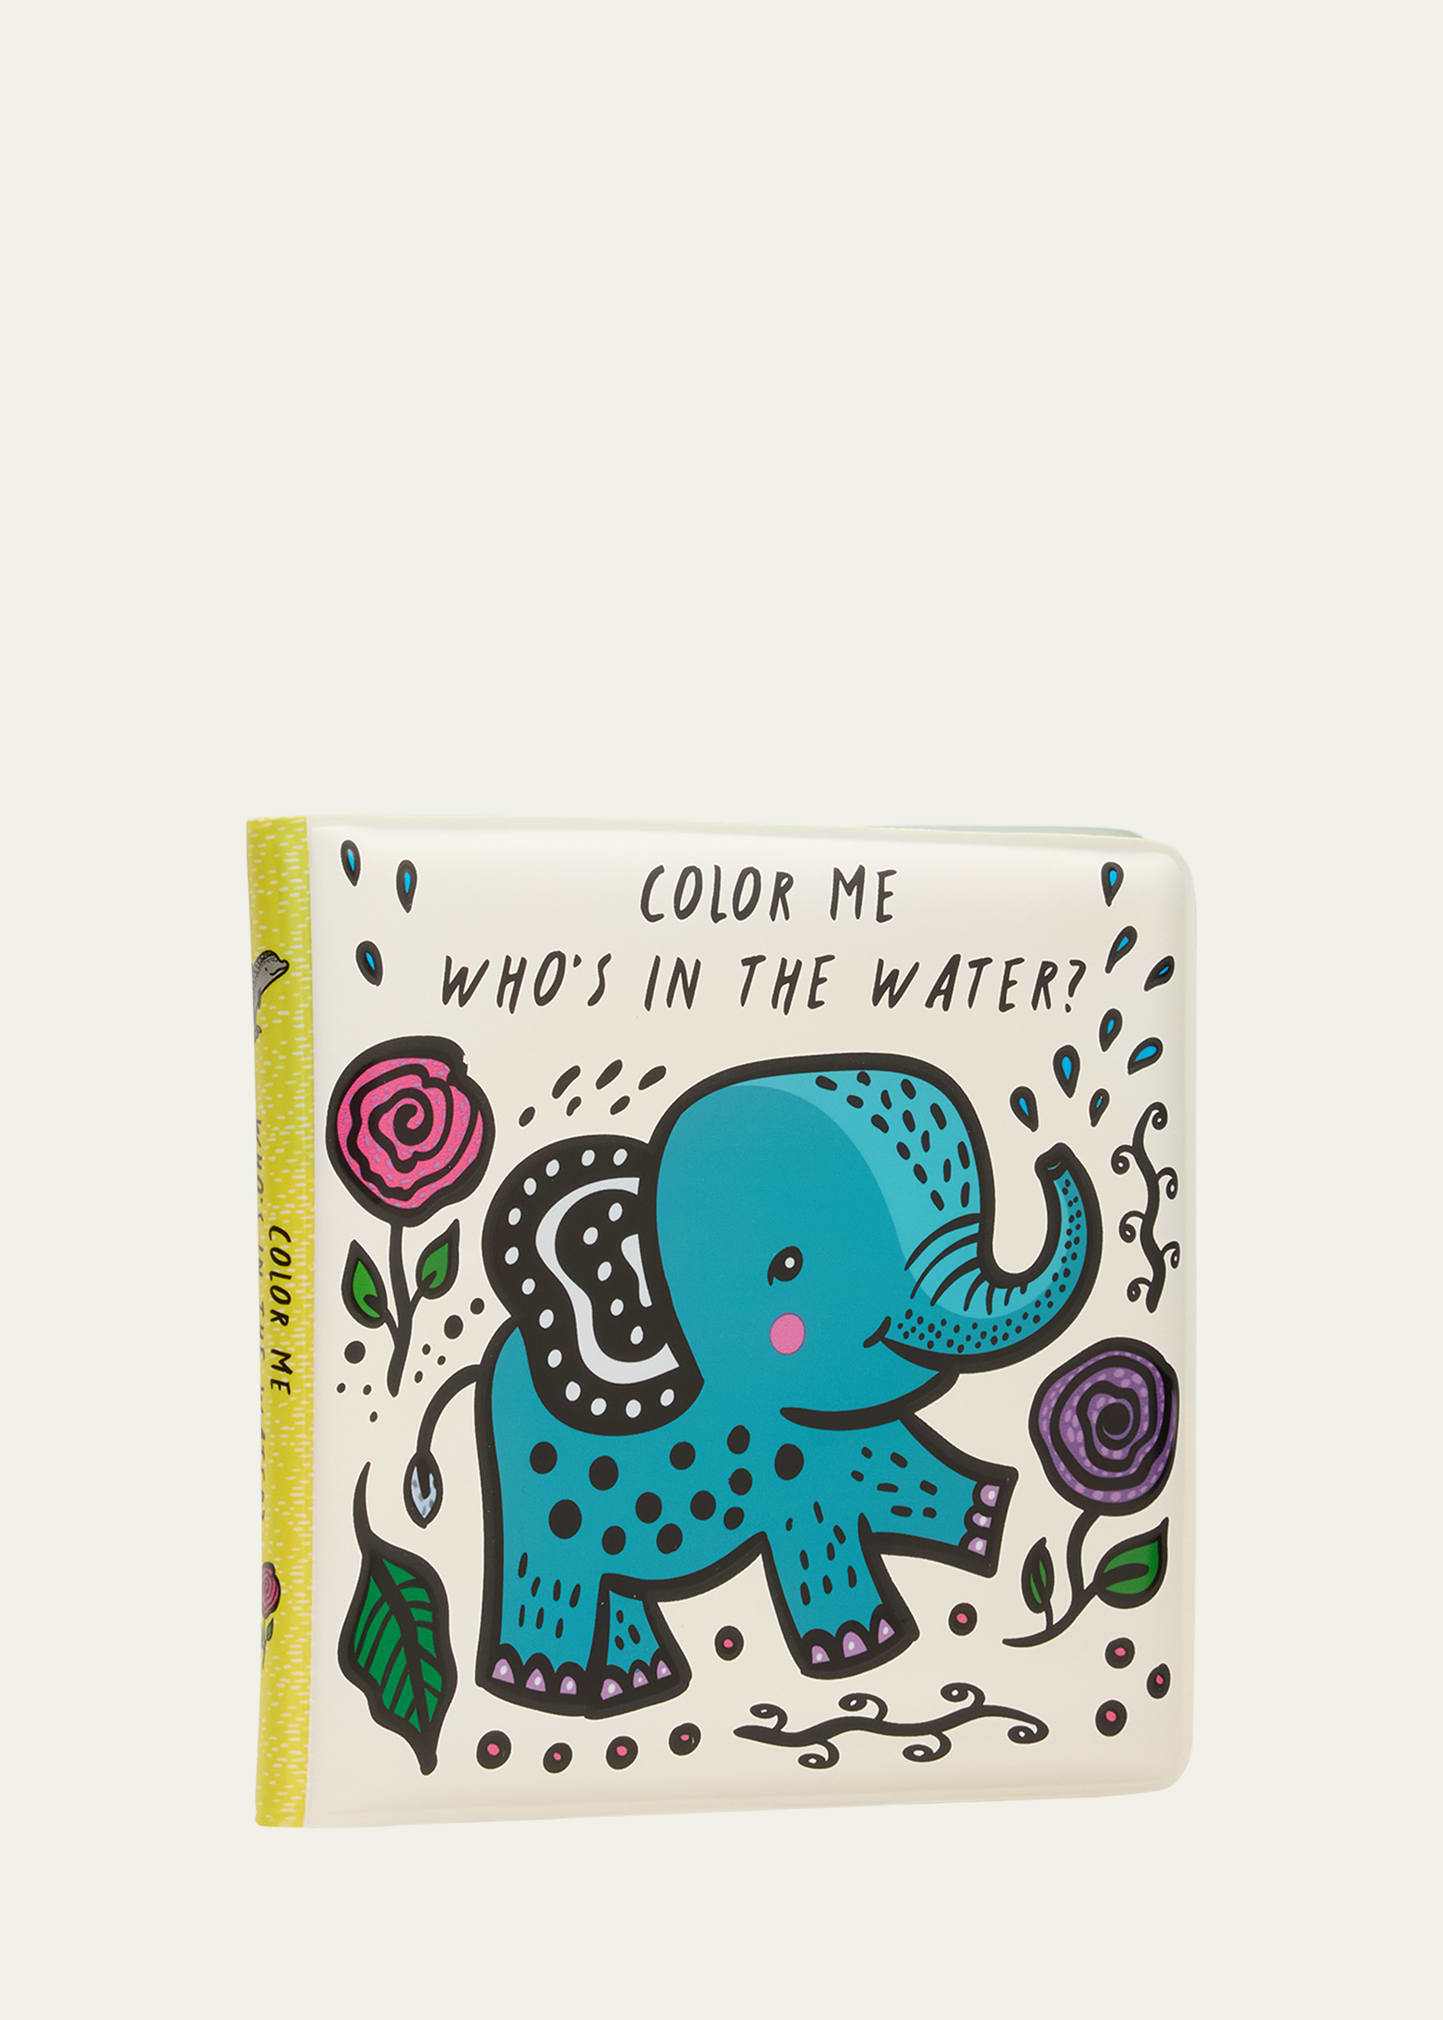 Kid's "Color Me: Who's in the Water?" Book by Surya Sajnani